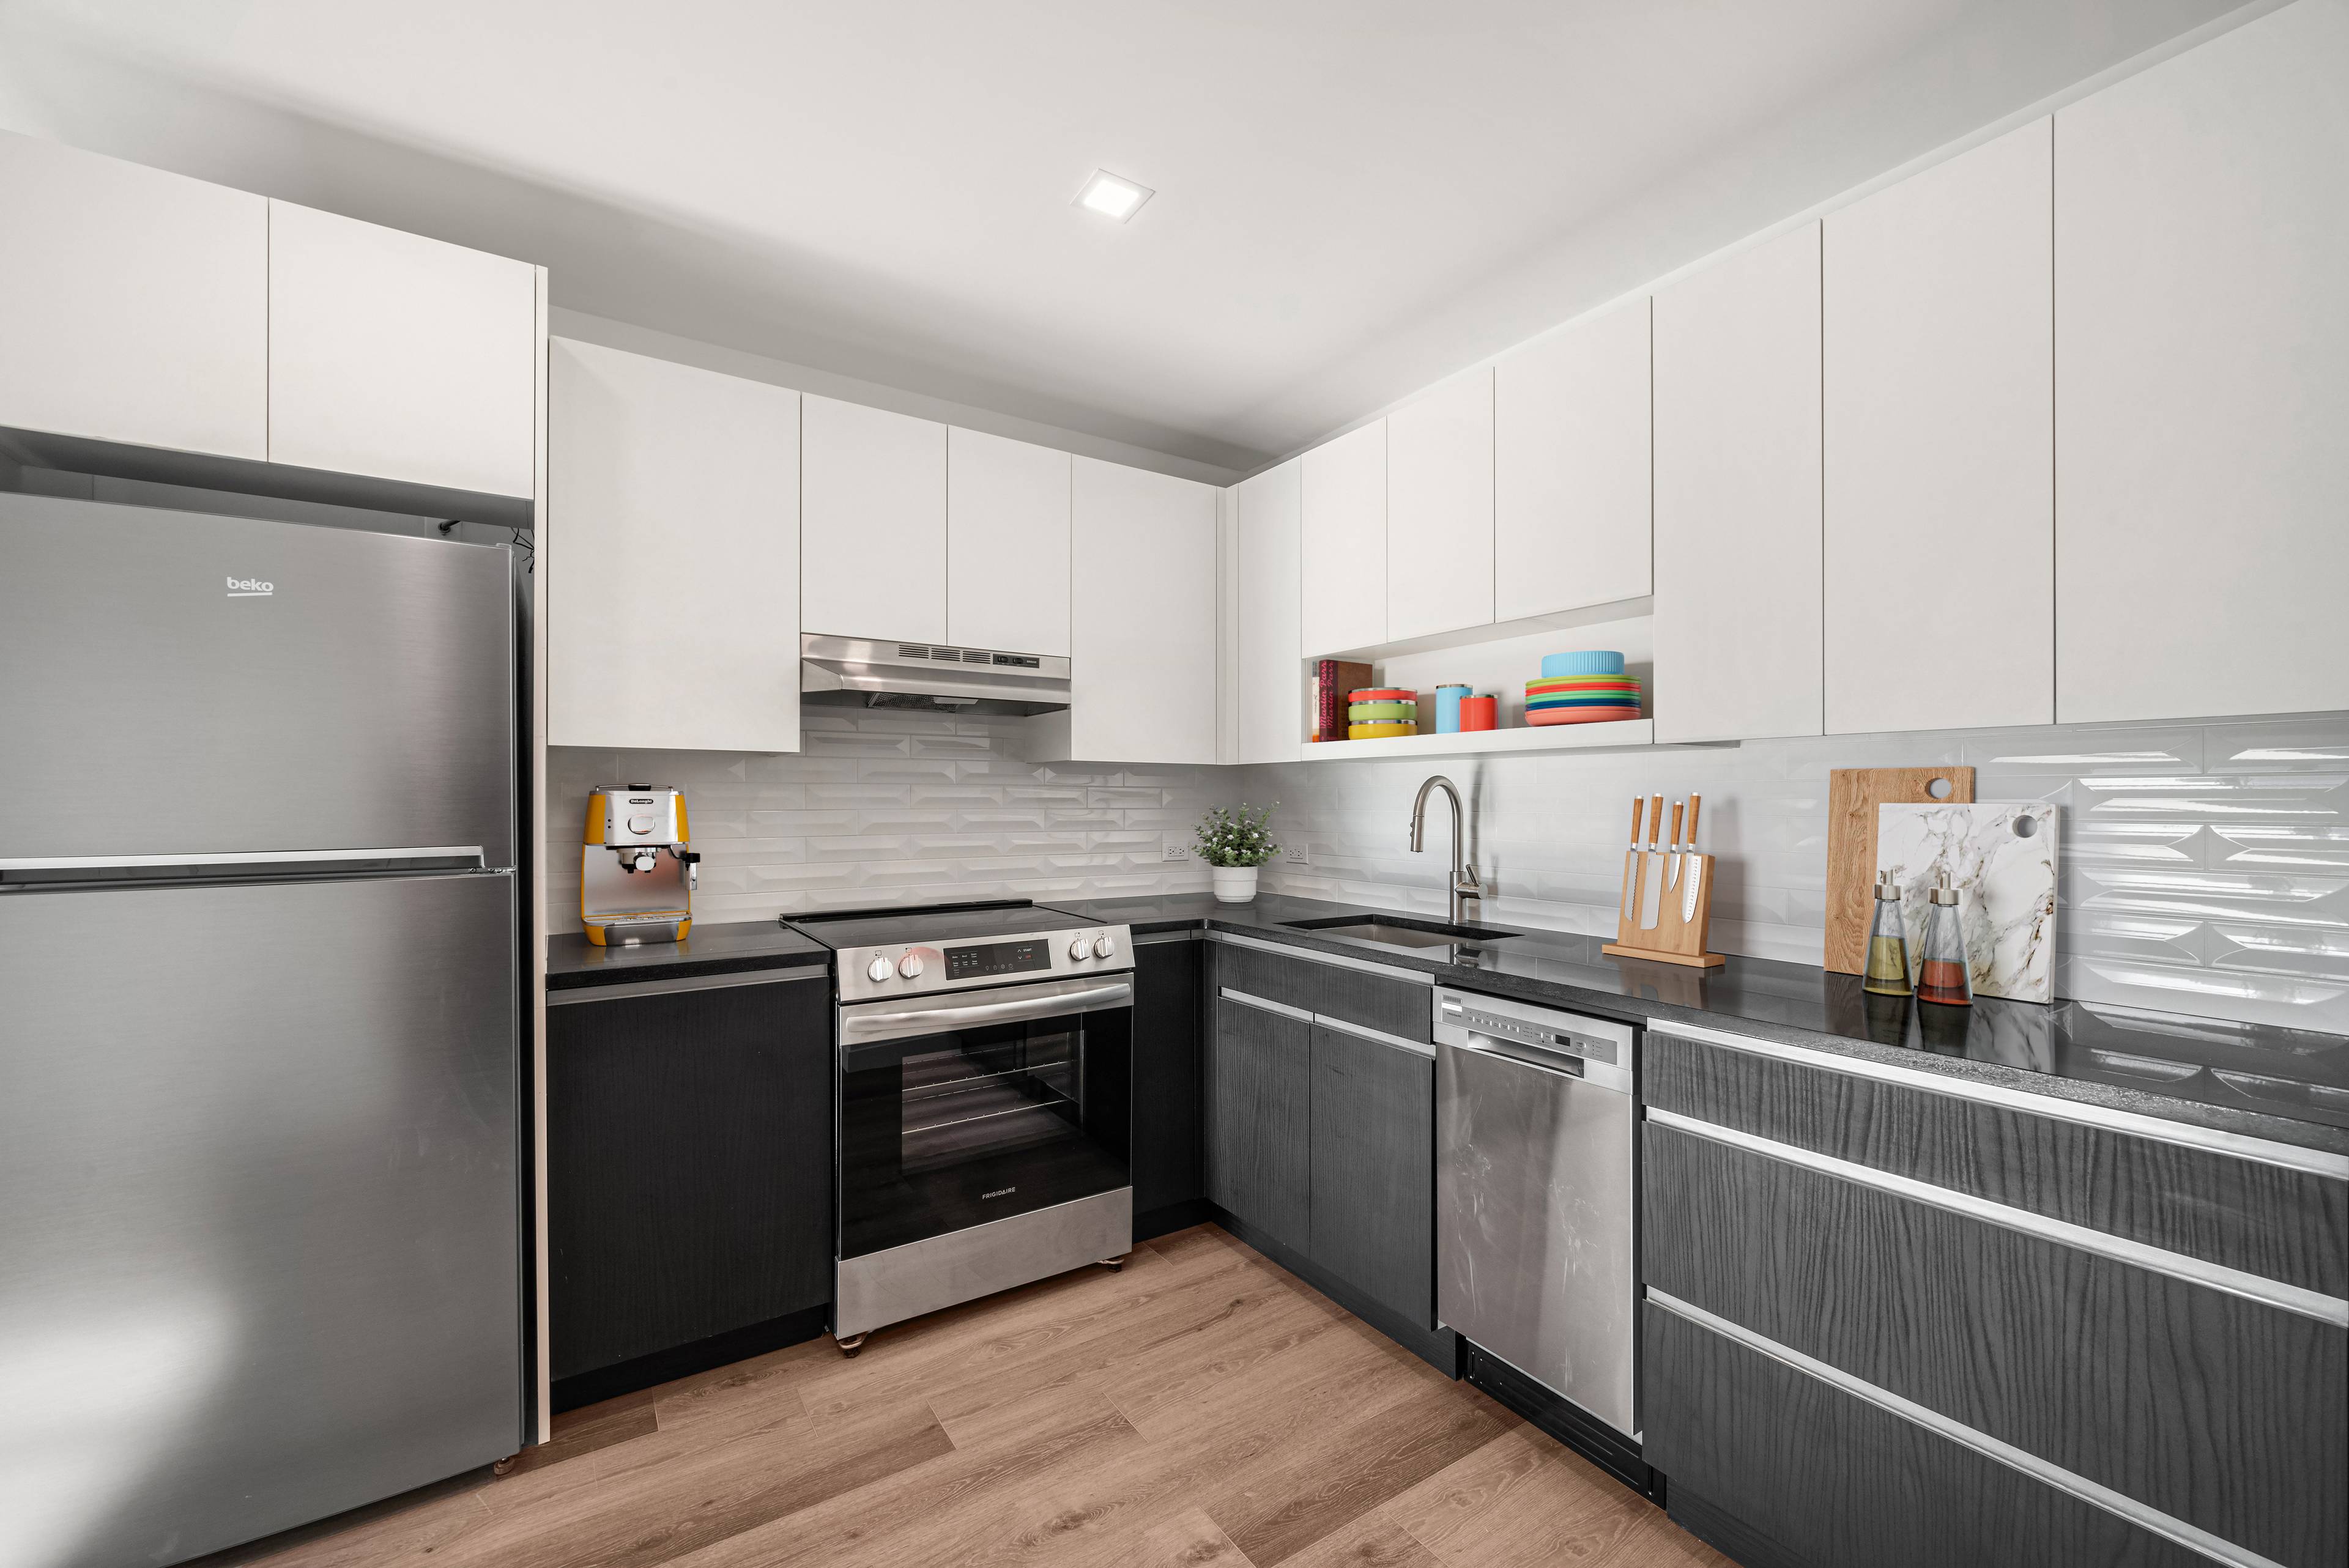 Introducing The Bronx Vibe, a brand new rental development in Concourse Village that's not just a bunch of walls, it's a lifestyle statement.